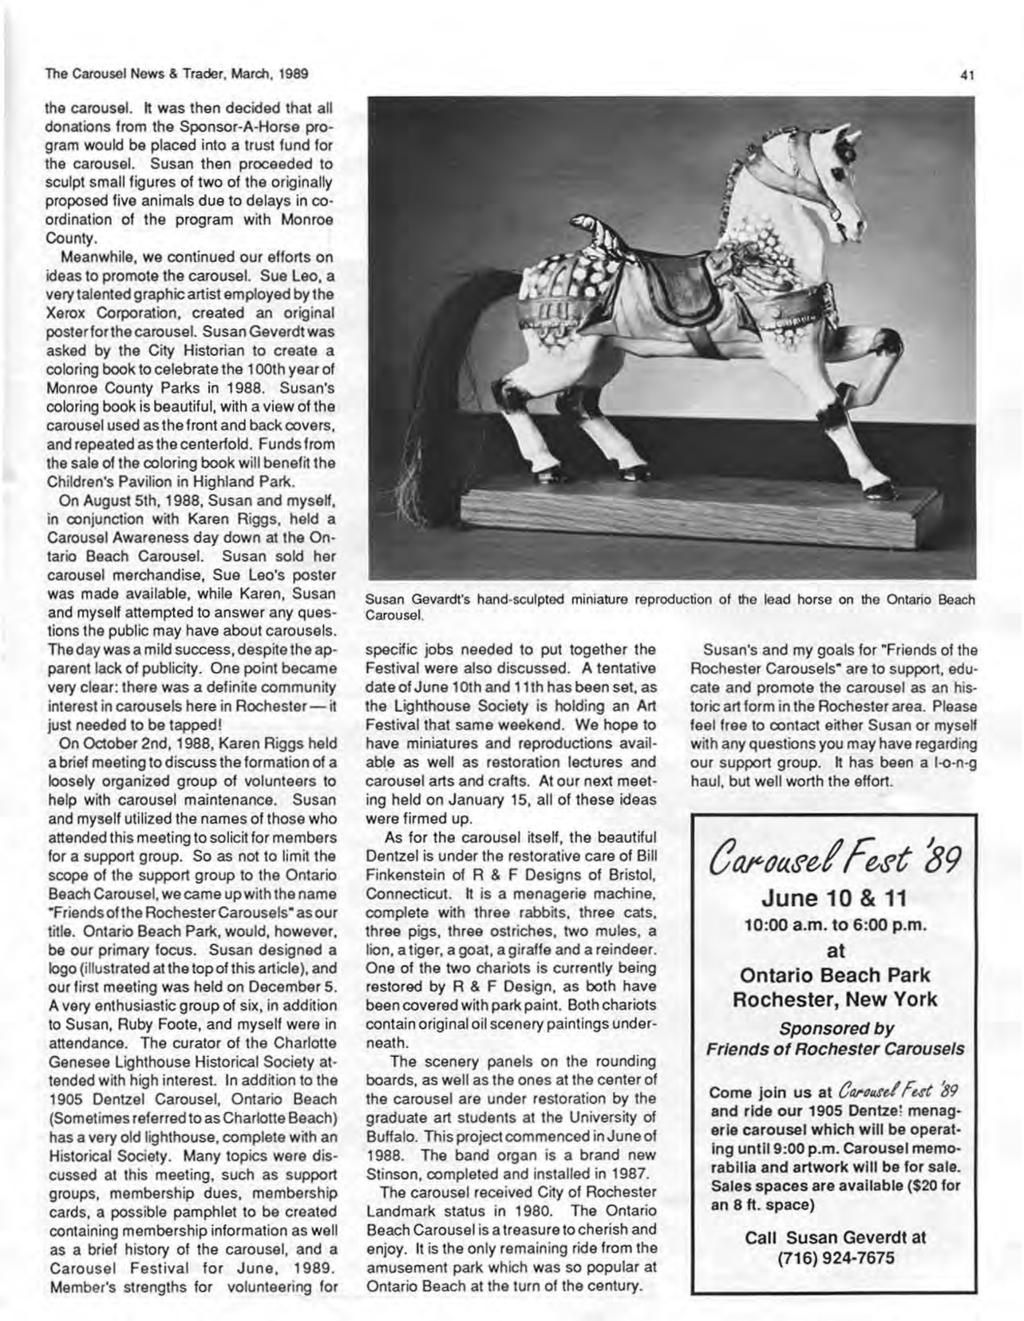 The Carousel News & Trader, March, 1989 the carousel. It was then decided that all donations from the Sponsor-A-Horse program would be placed into a trust fund for the carousel.